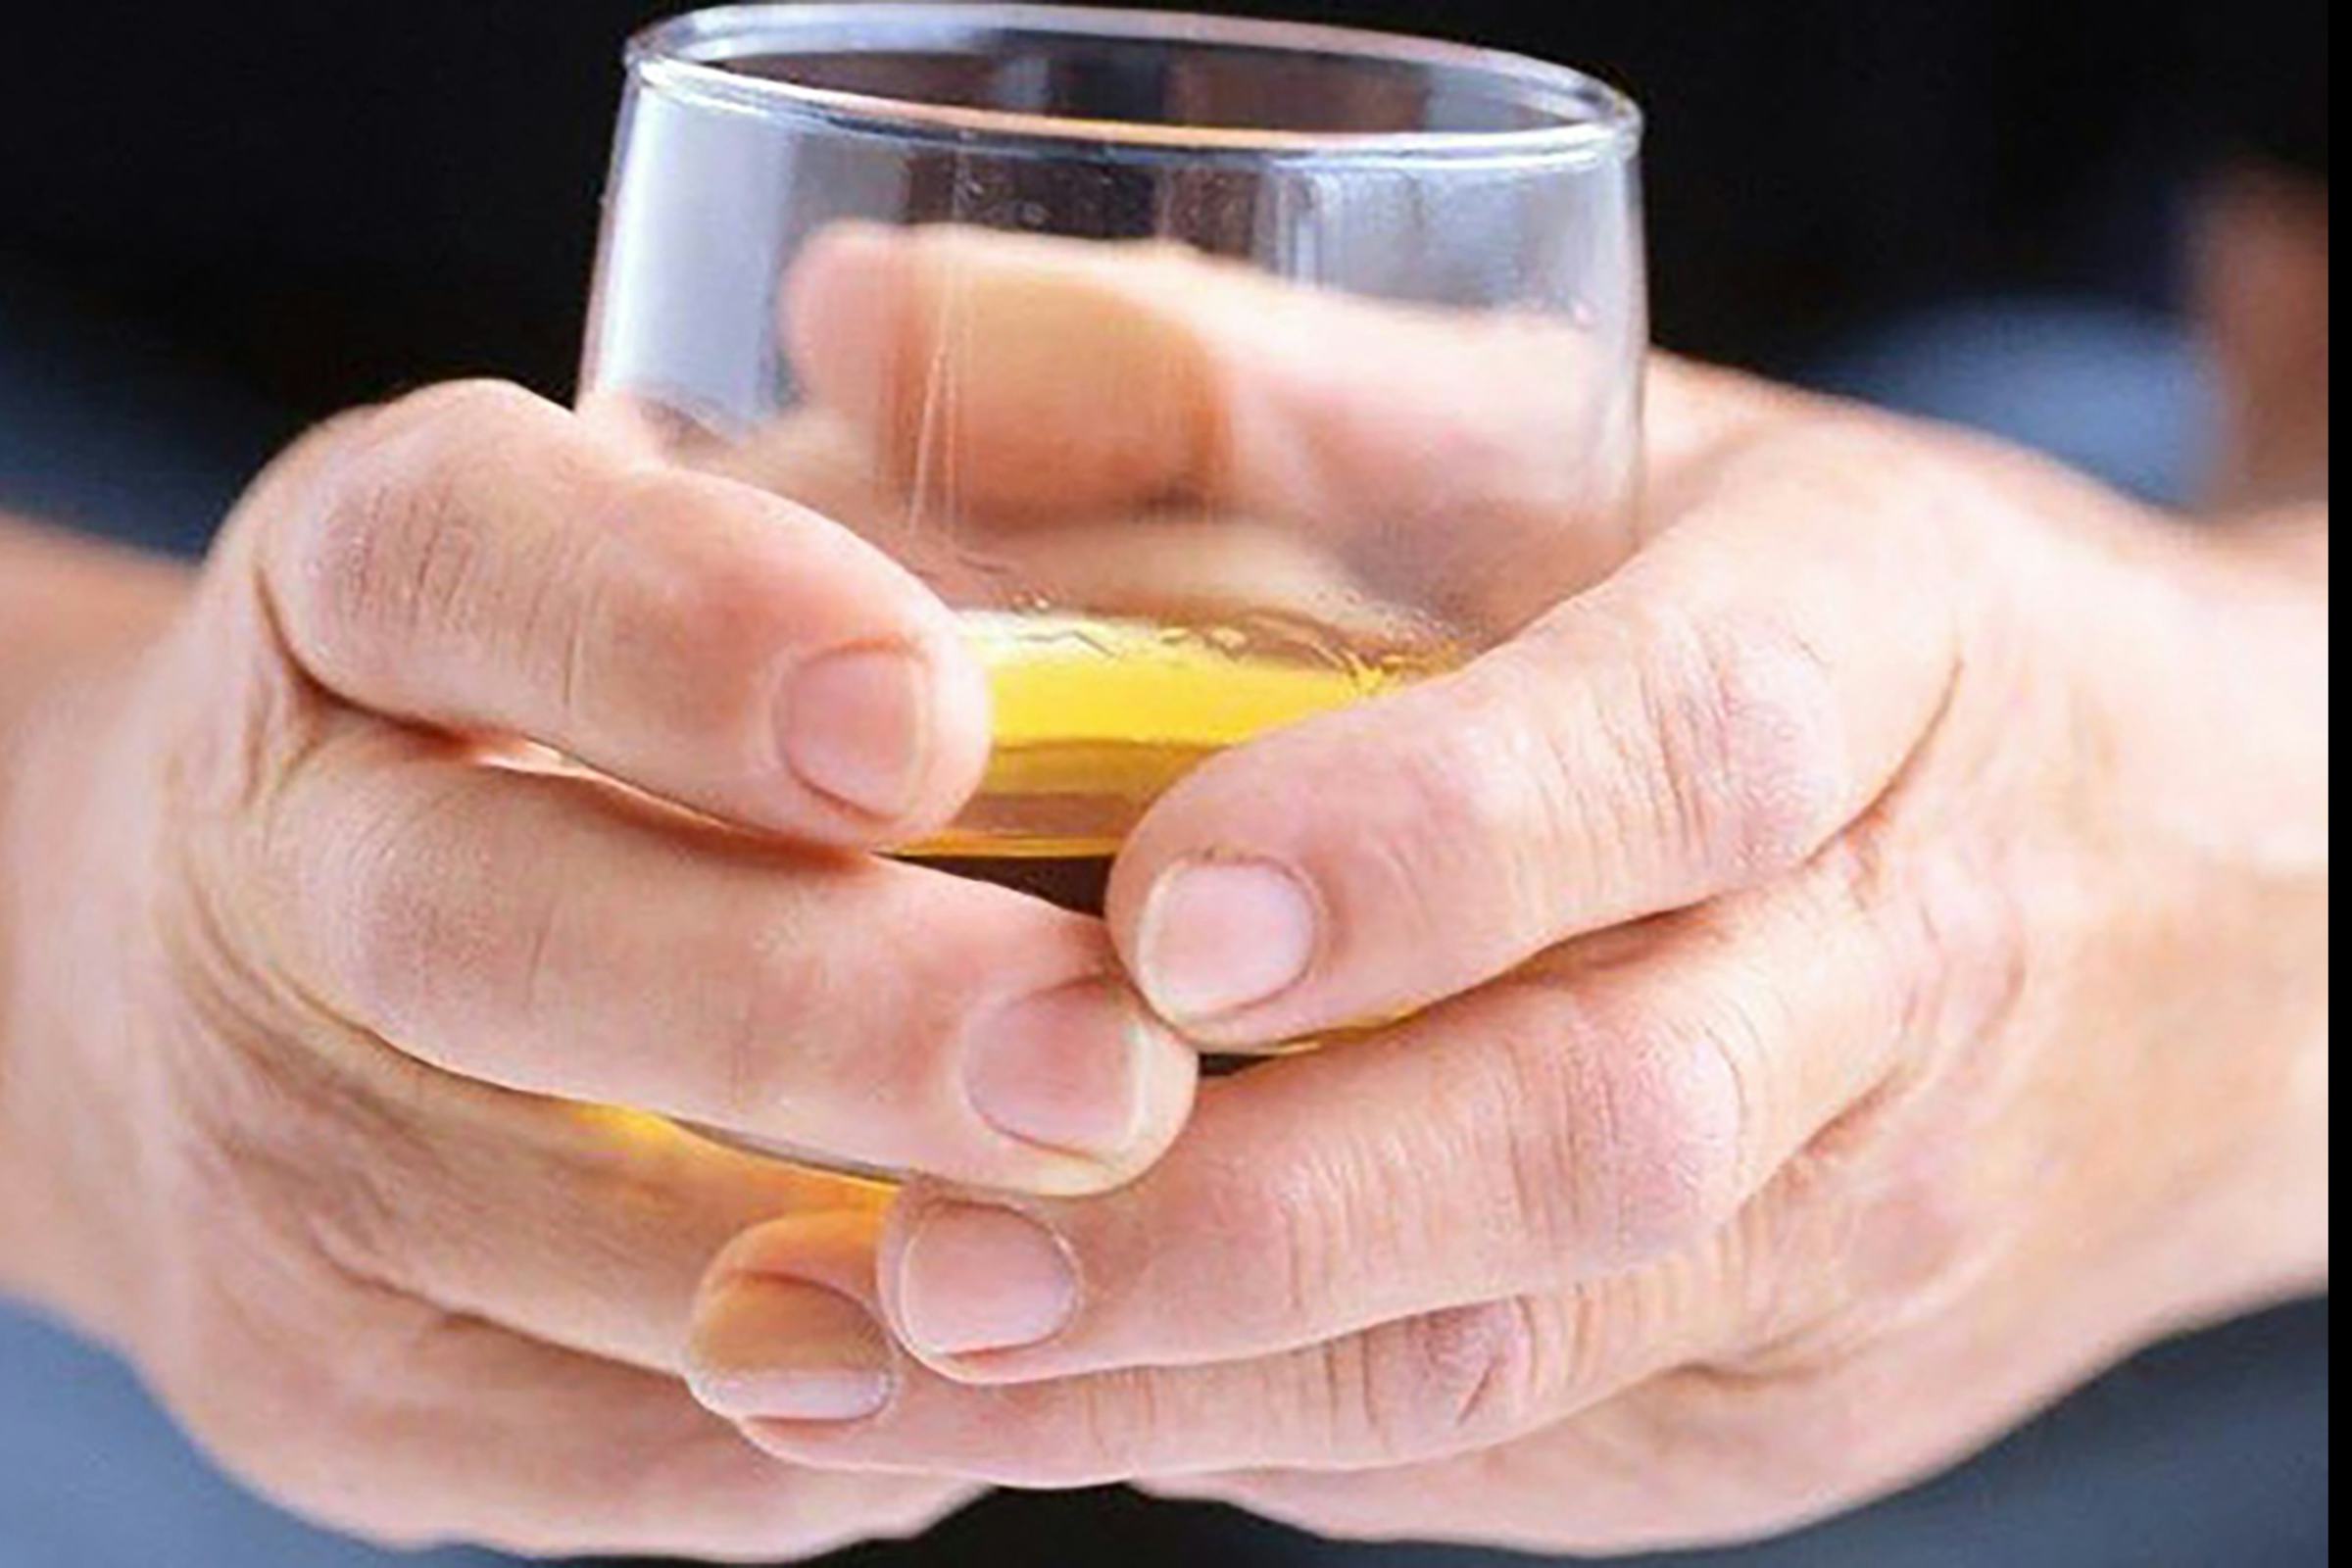 A pair of hands holding a glass of semi-clear yellowish liquid